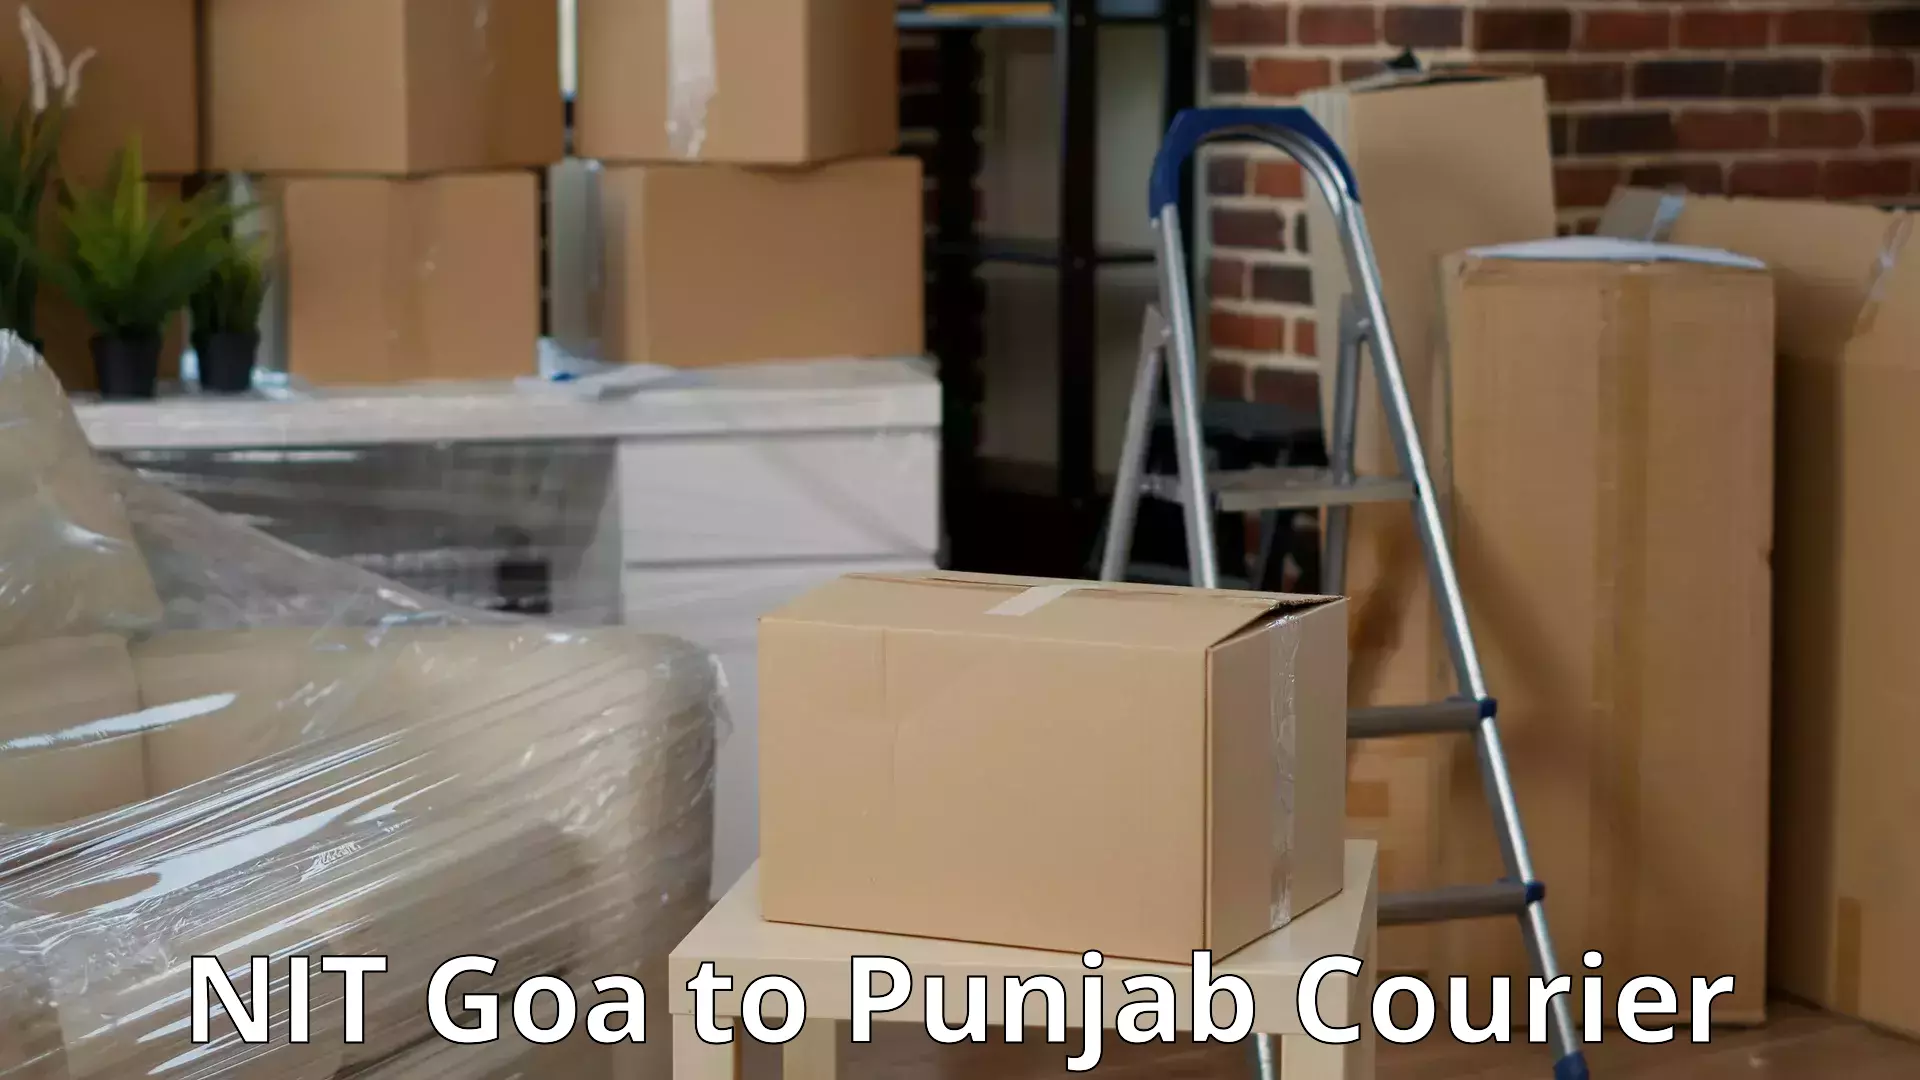 Furniture delivery service NIT Goa to Beas